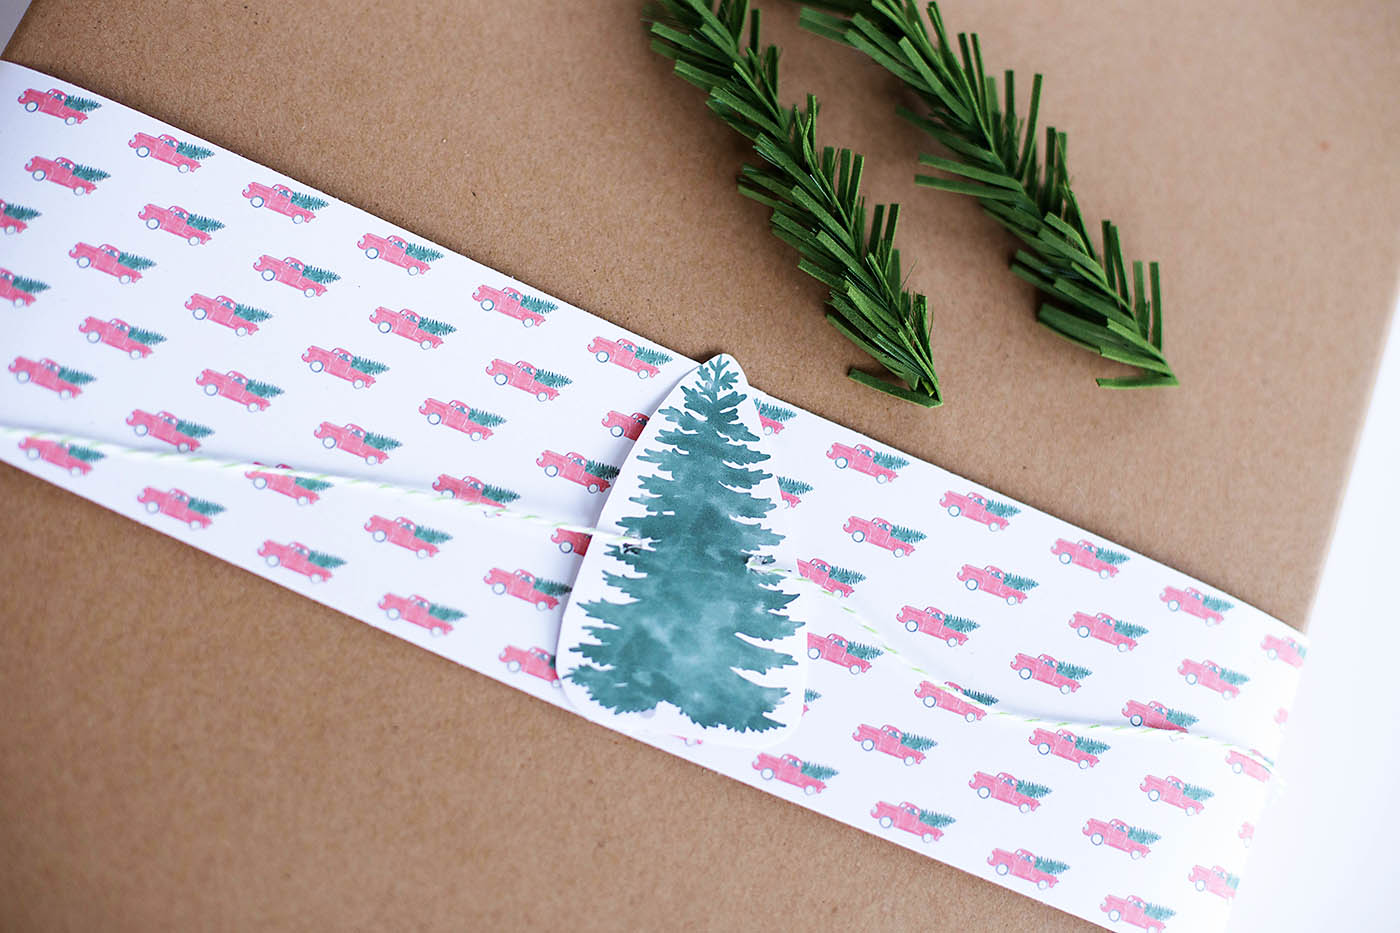 Choose and wrap a perfect useful gift for the tech savvy Dad in your life + free printable wrapping paper!